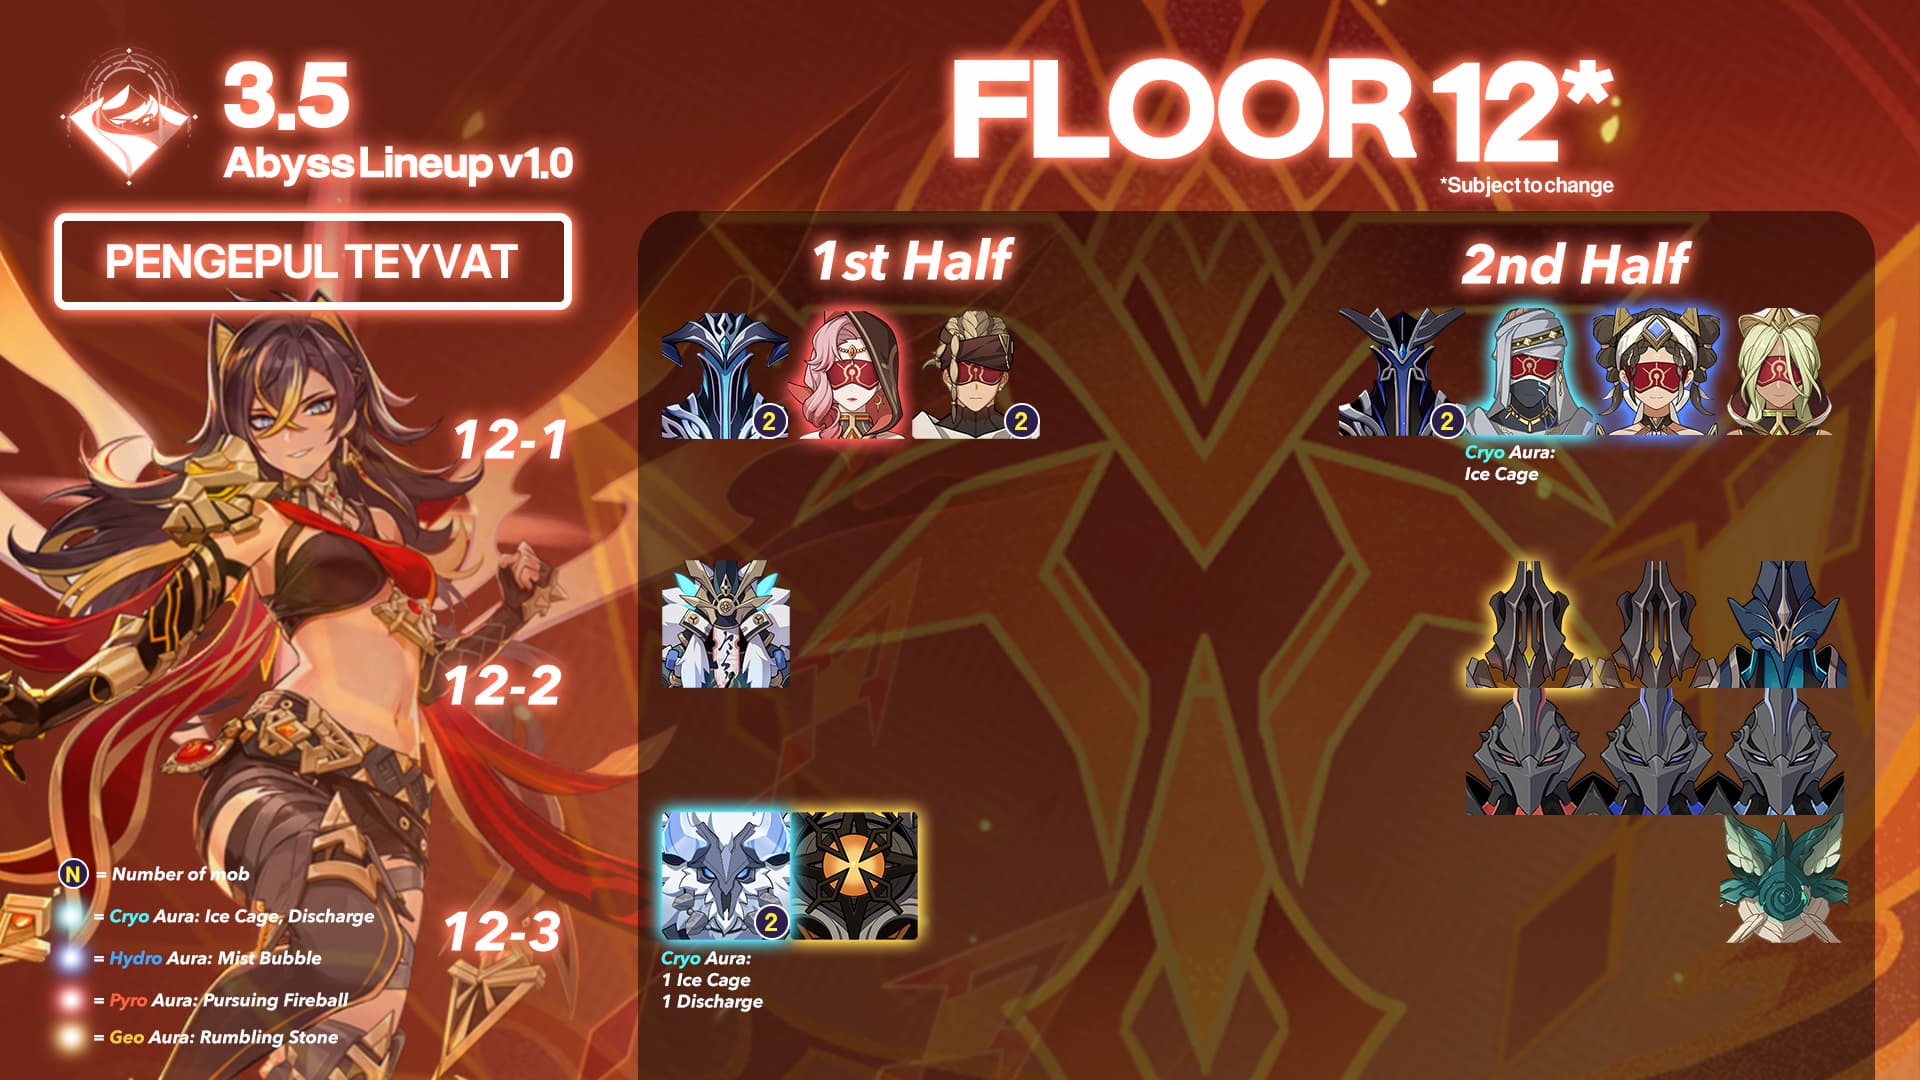 New boss Genshin Impact Stekh Wenut appears in 3.5 Spiral Abyss: infographic with animation girl and icons